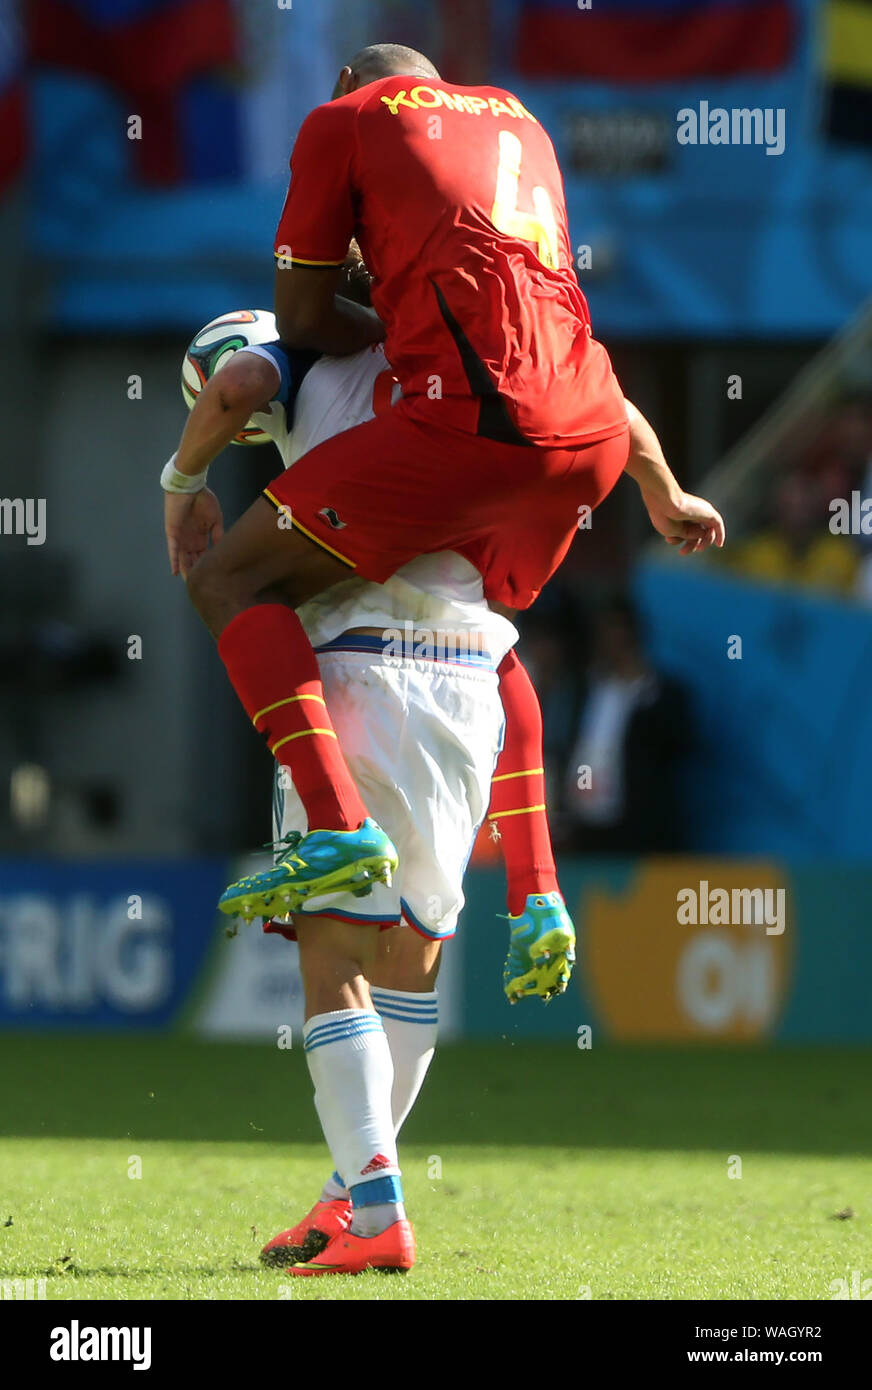 Rio de Janeiro, June 18, 2014. Football players dispute the ball during the match  Russia vs Belgium for the 2014 World Cup at the Maracanã Stadi Stock Photo